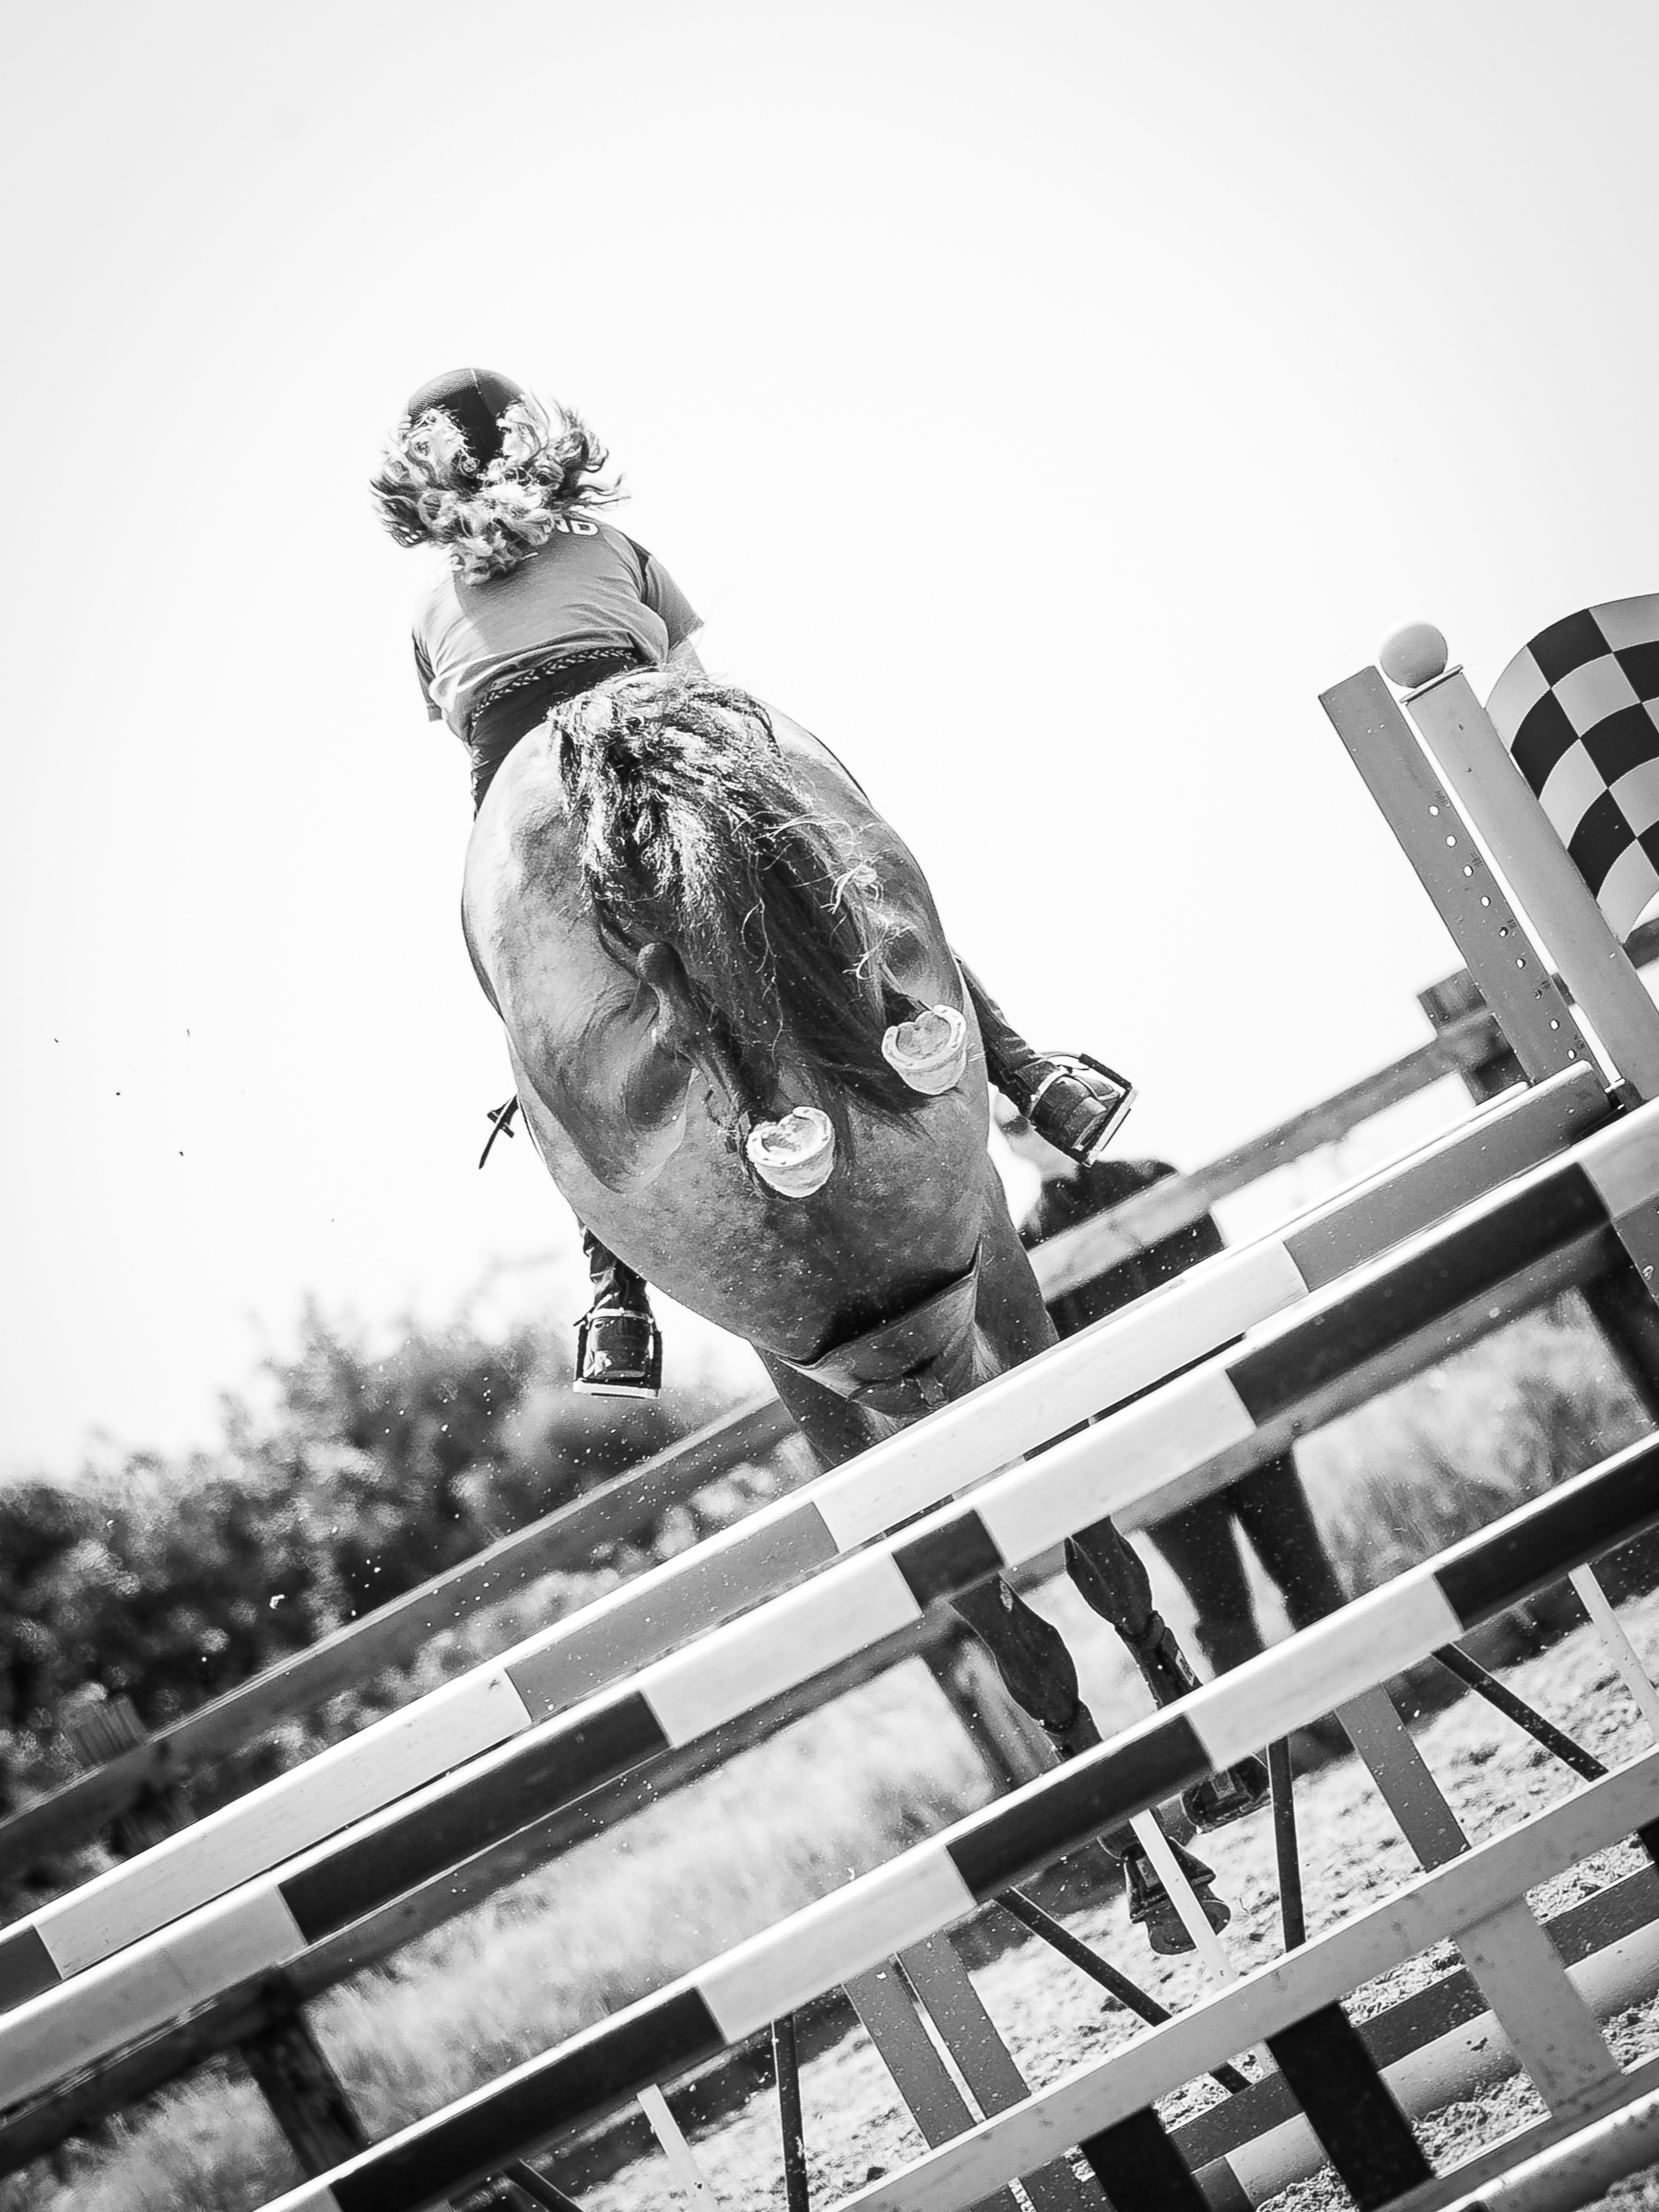 monochrome photo of a horse jumping a show jump from behind with hooves in the air